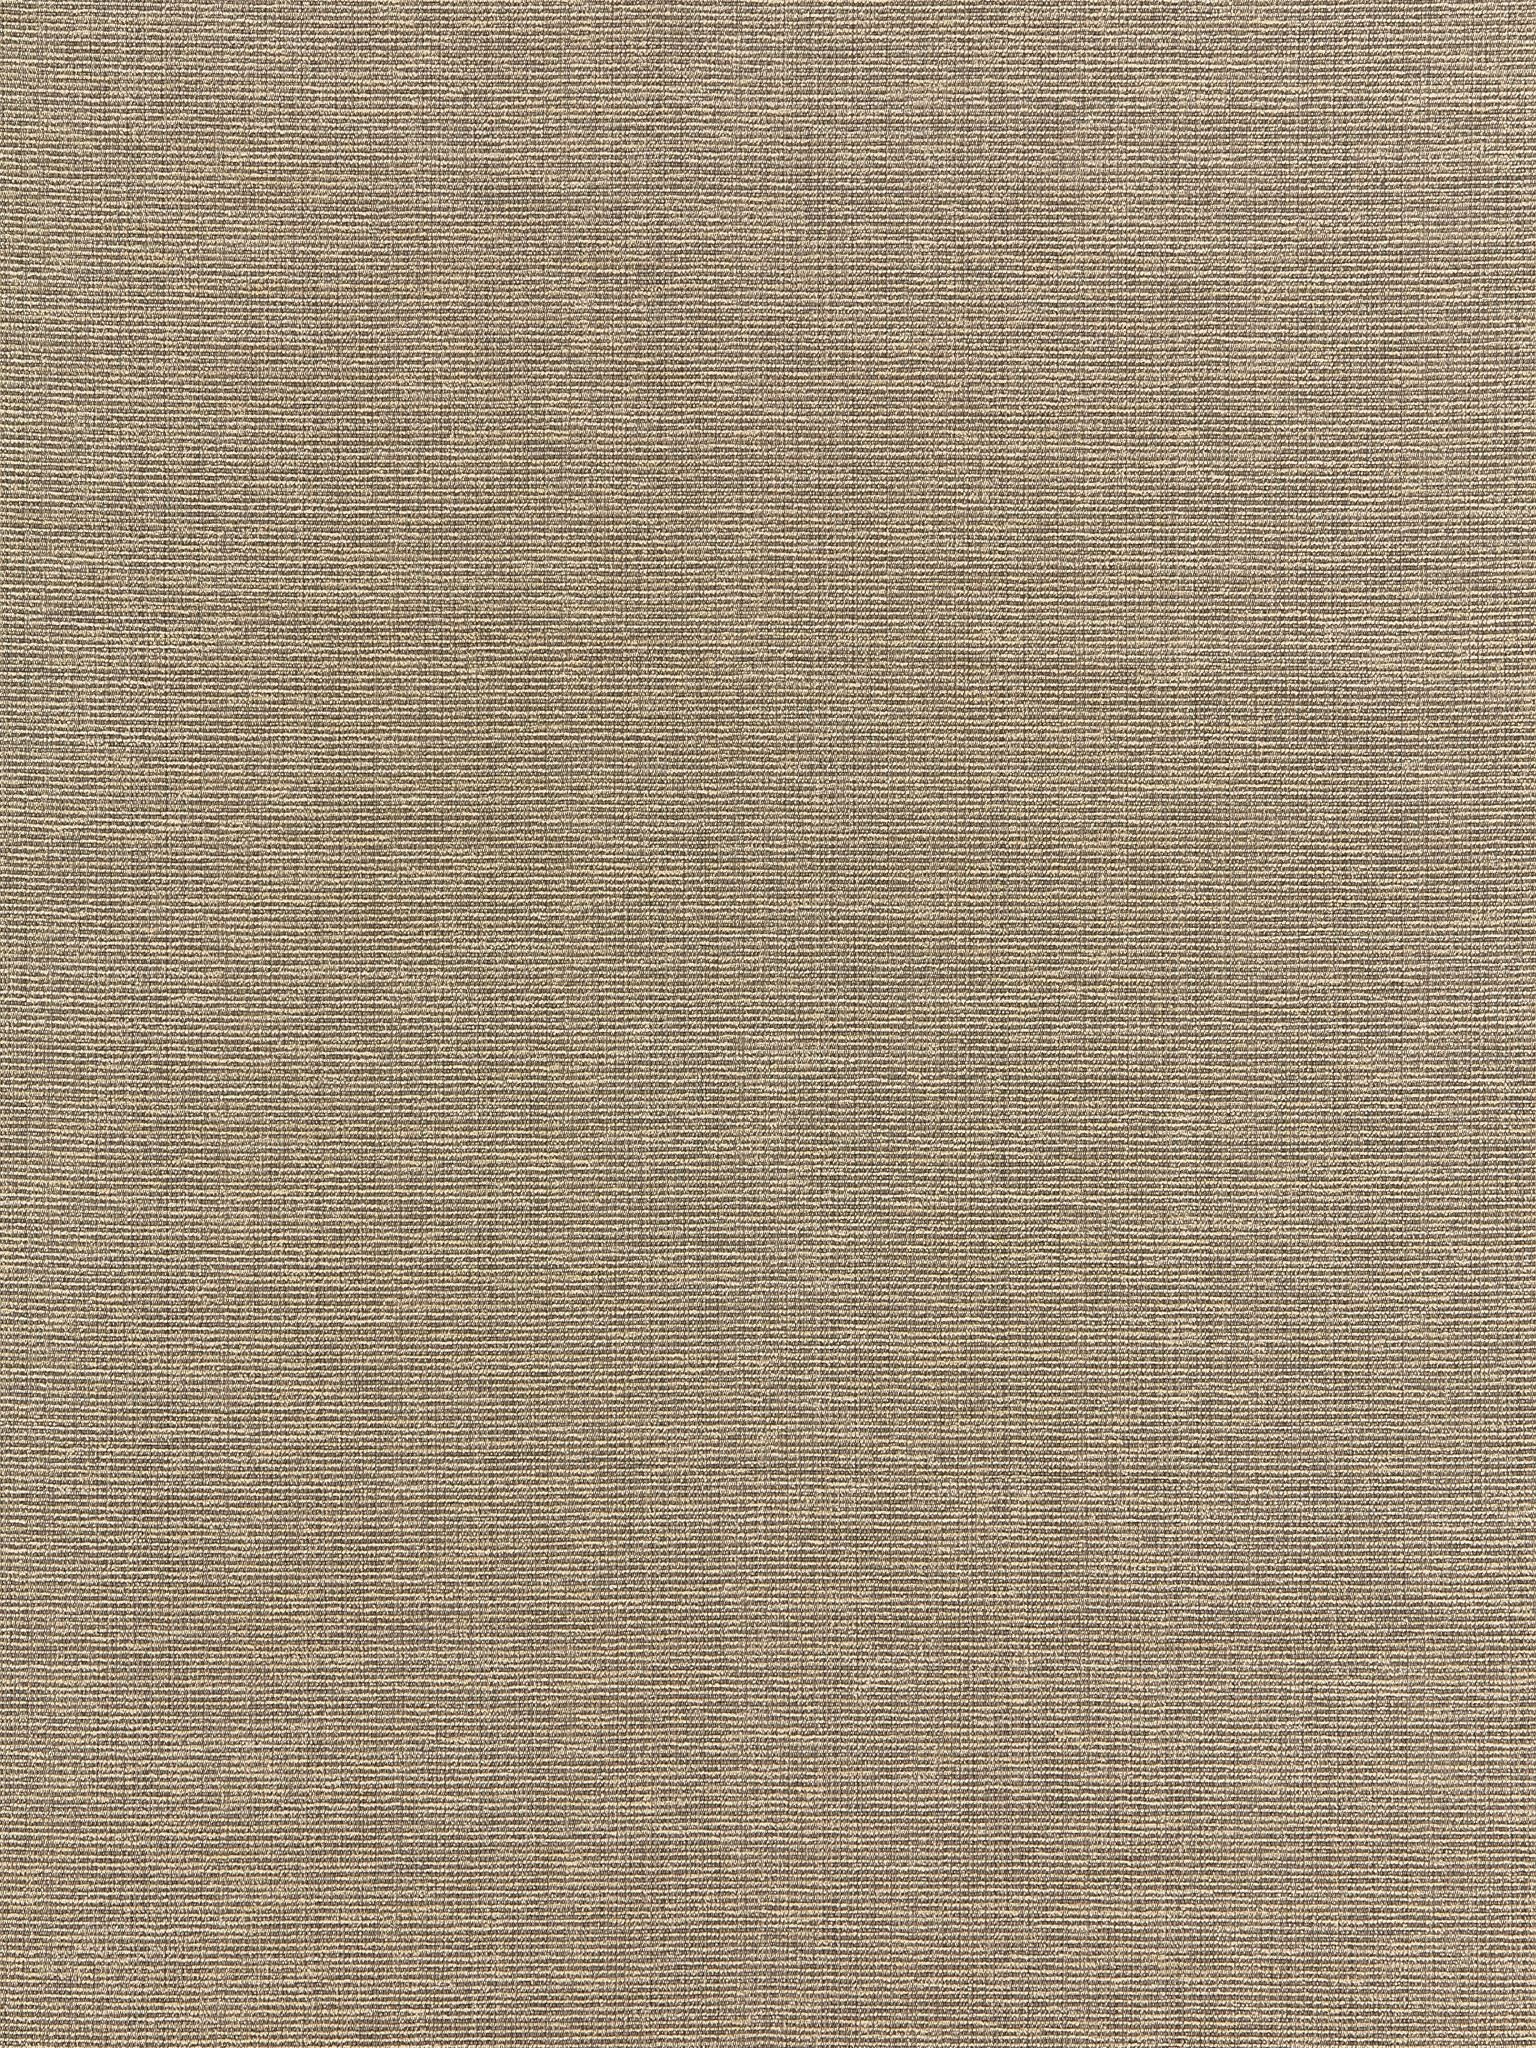 Thompson Chenille fabric in taupe color - pattern number BK 0005K65114 - by Scalamandre in the Old World Weavers collection